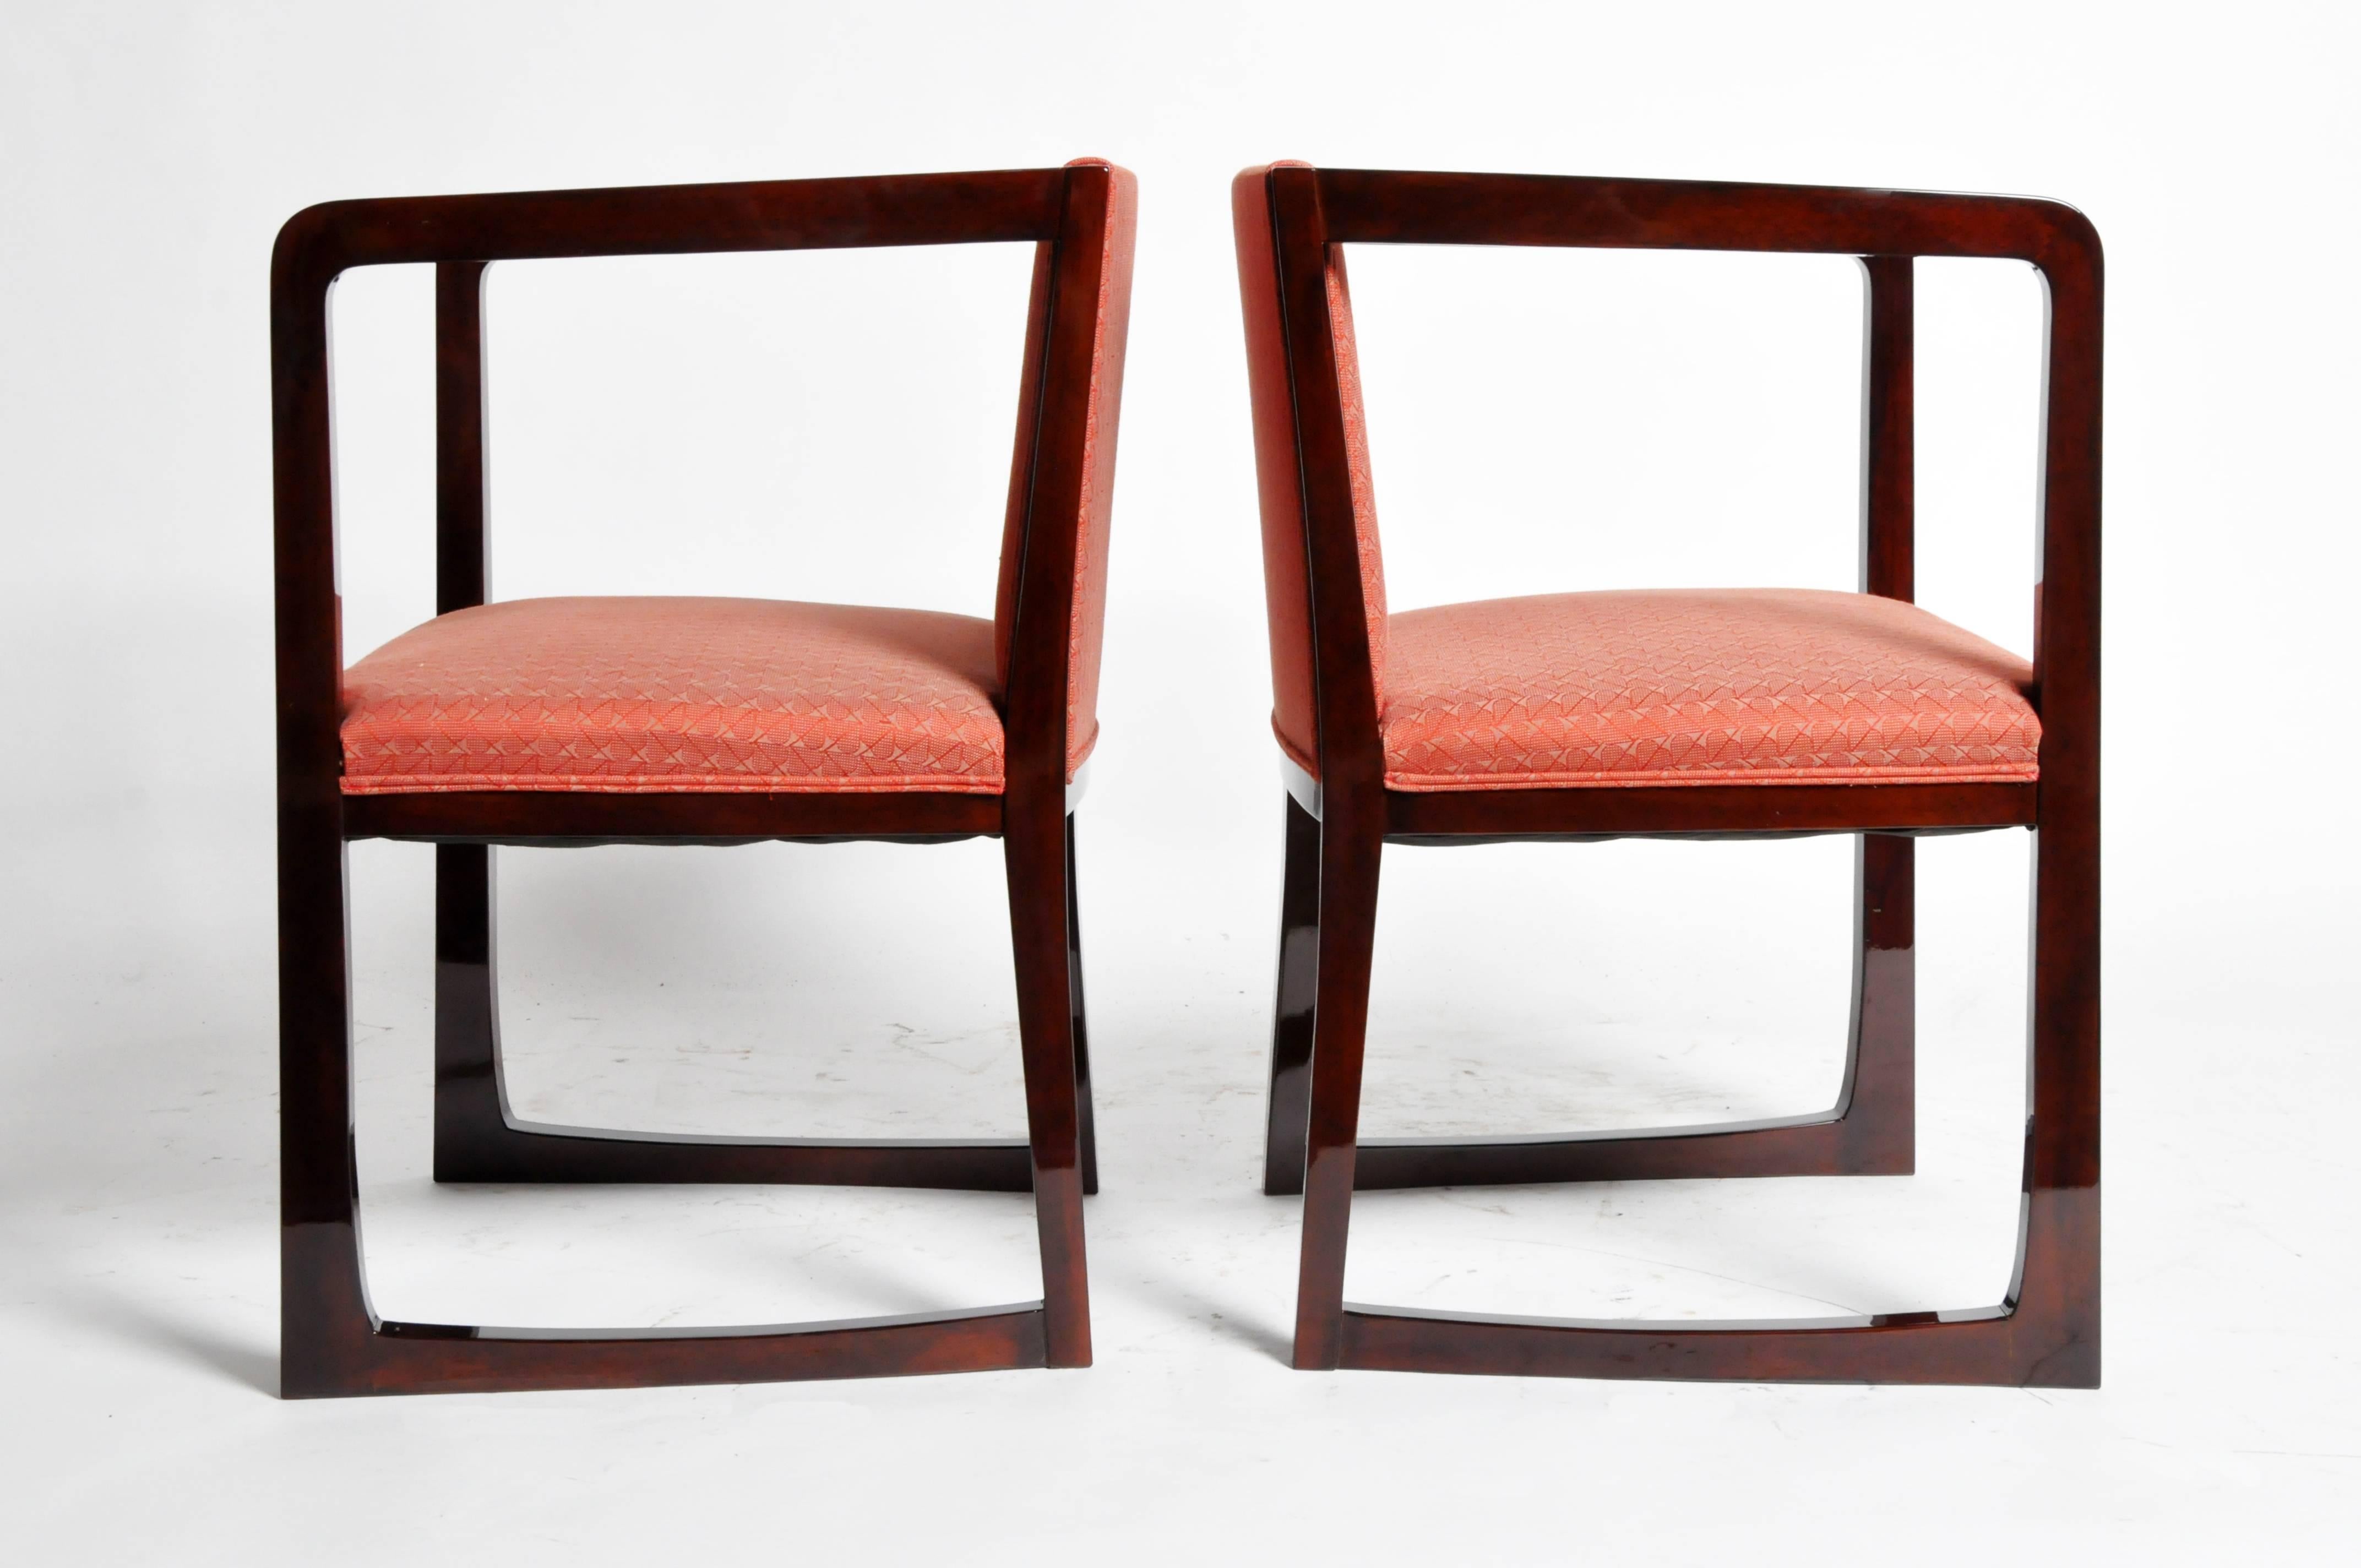 This pair of Art Deco style armchairs are from Budapest, Hungary and are made from walnut, circa 1960.